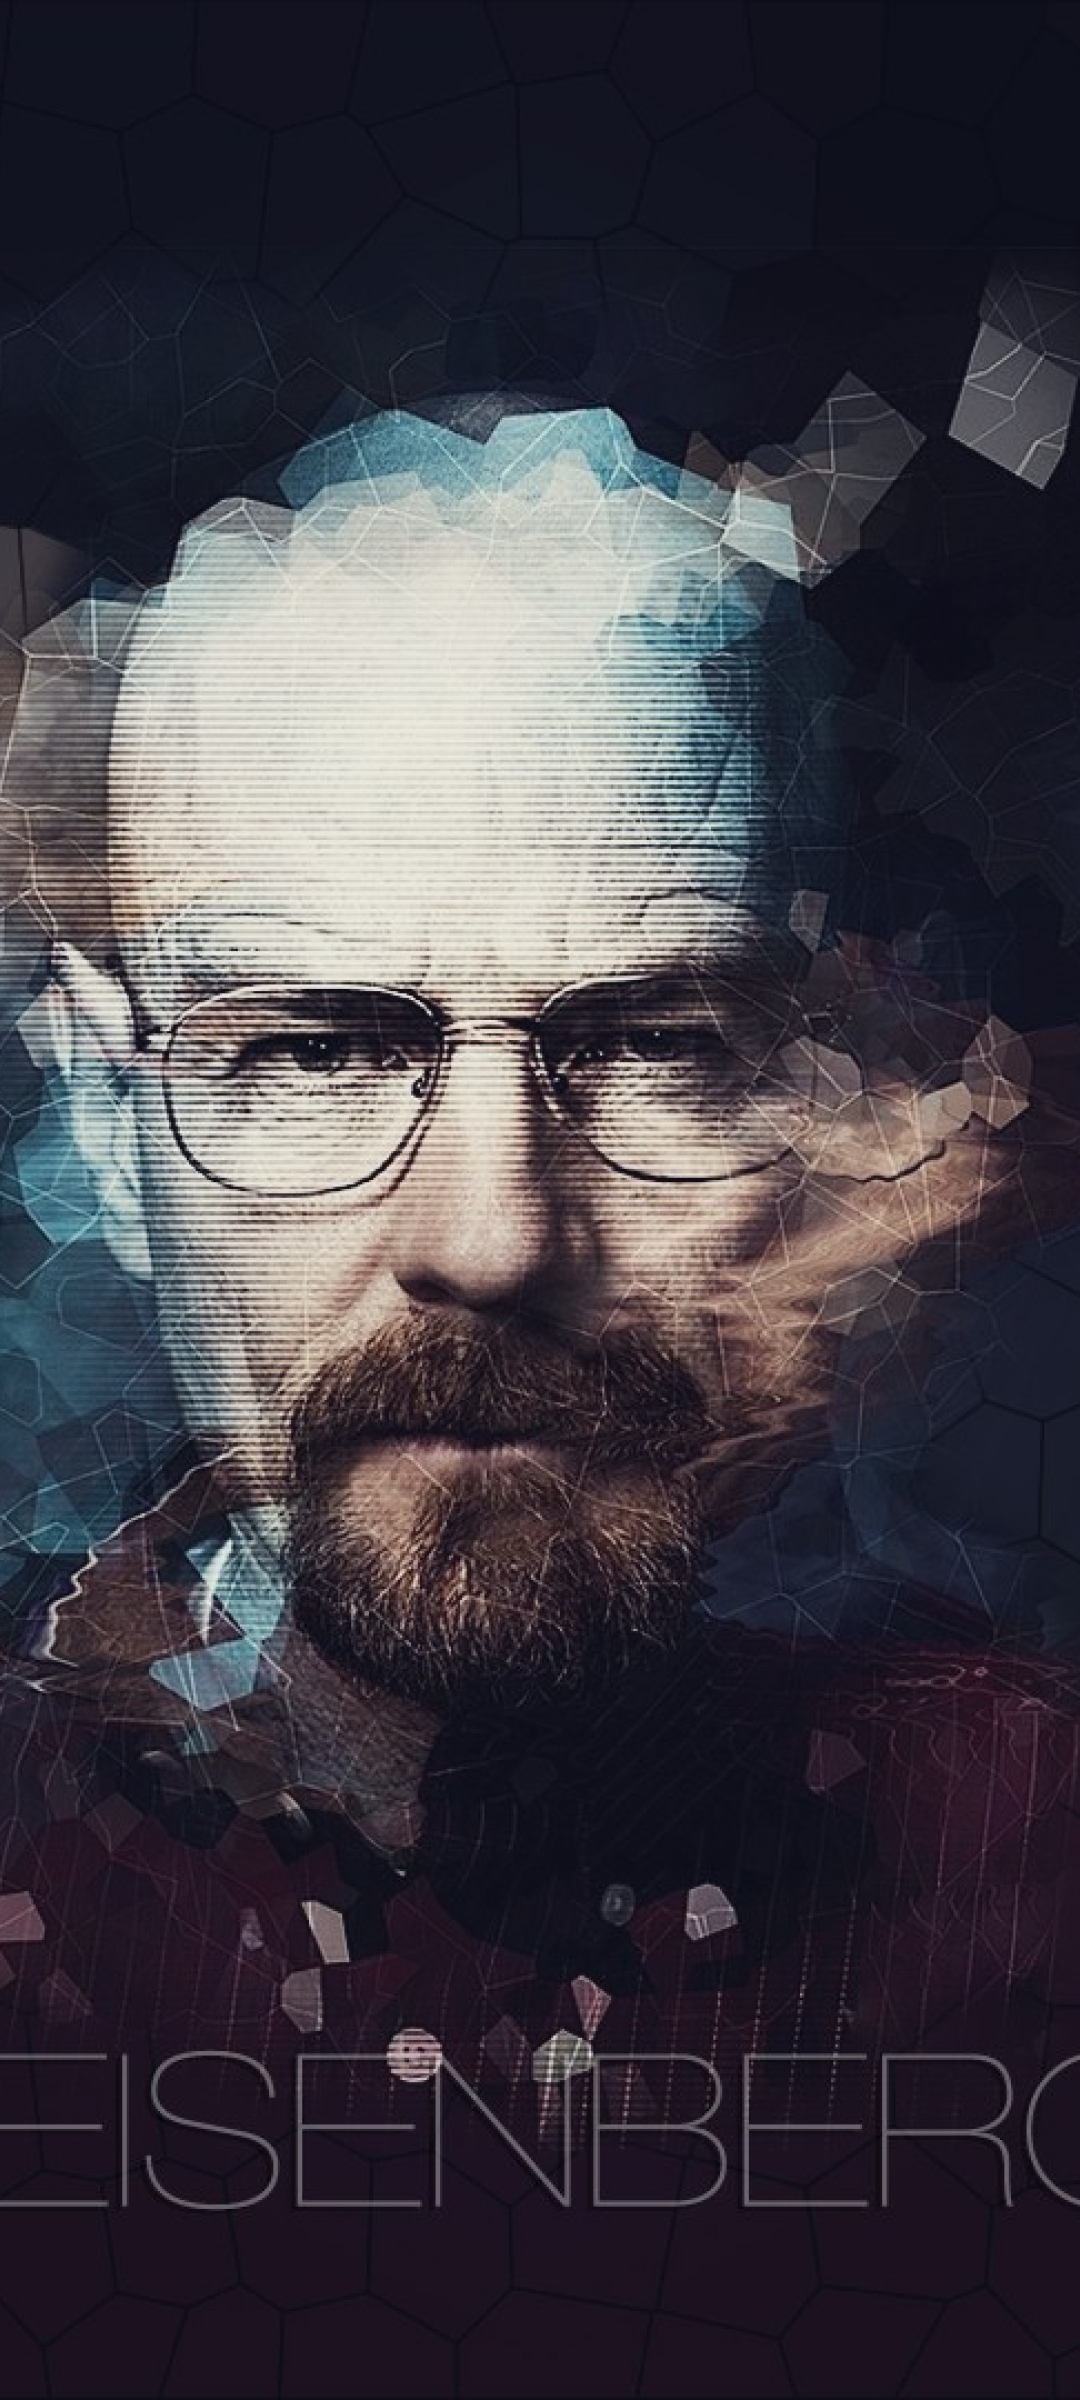 heisenberg» 1080P, 2k, 4k HD wallpapers, backgrounds free download | Rare  Gallery